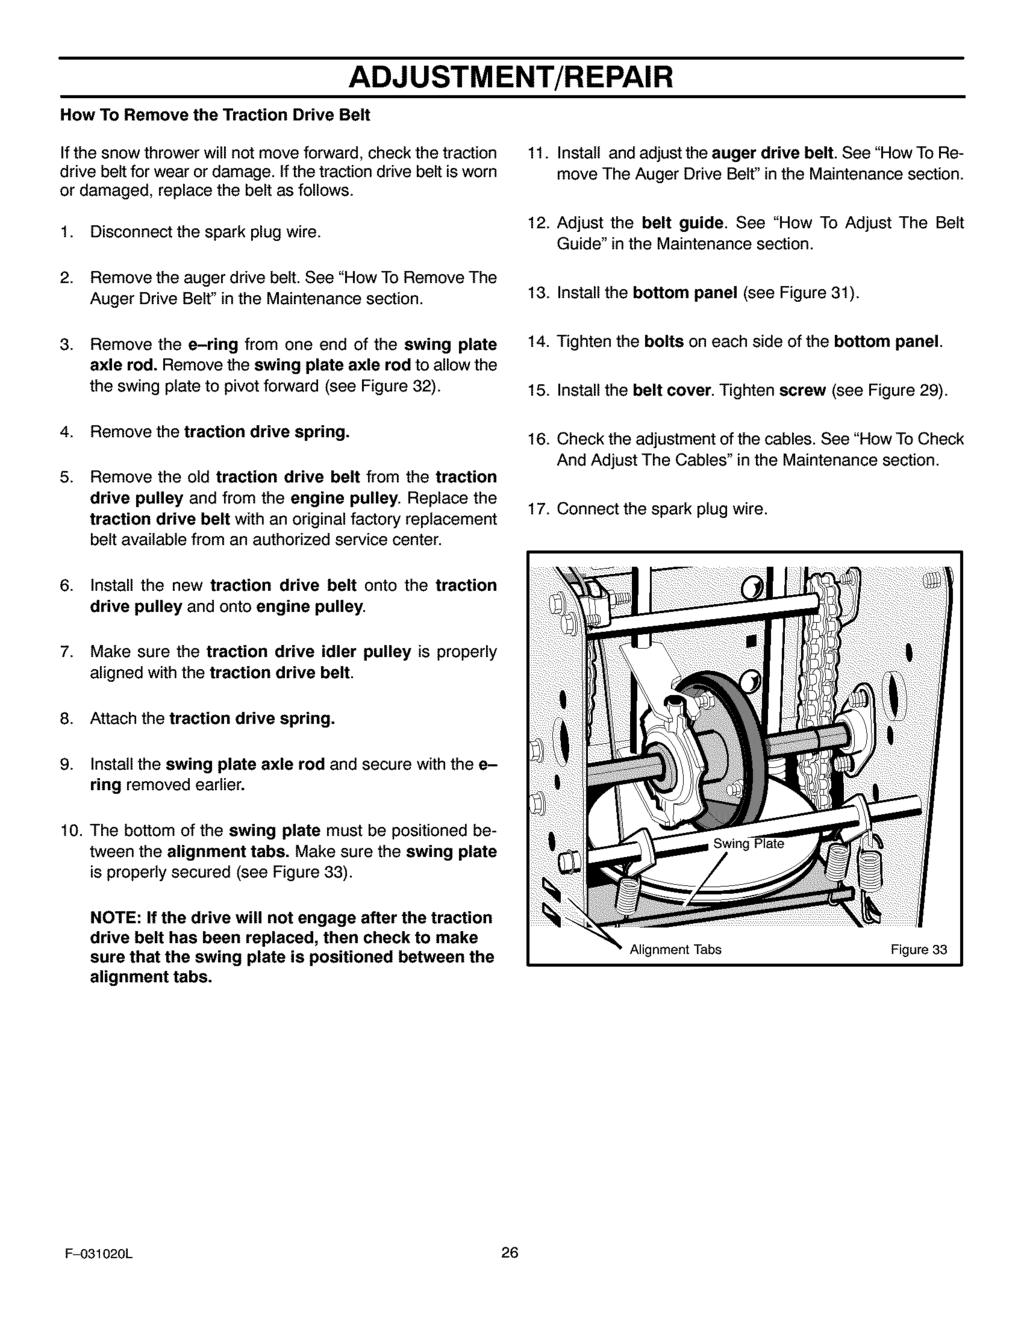 How To Remove the Traction Drive Belt ADJUSTMENT/REPAIR If the snow thrower will not move forward, check the traction drive belt for wear or damage.